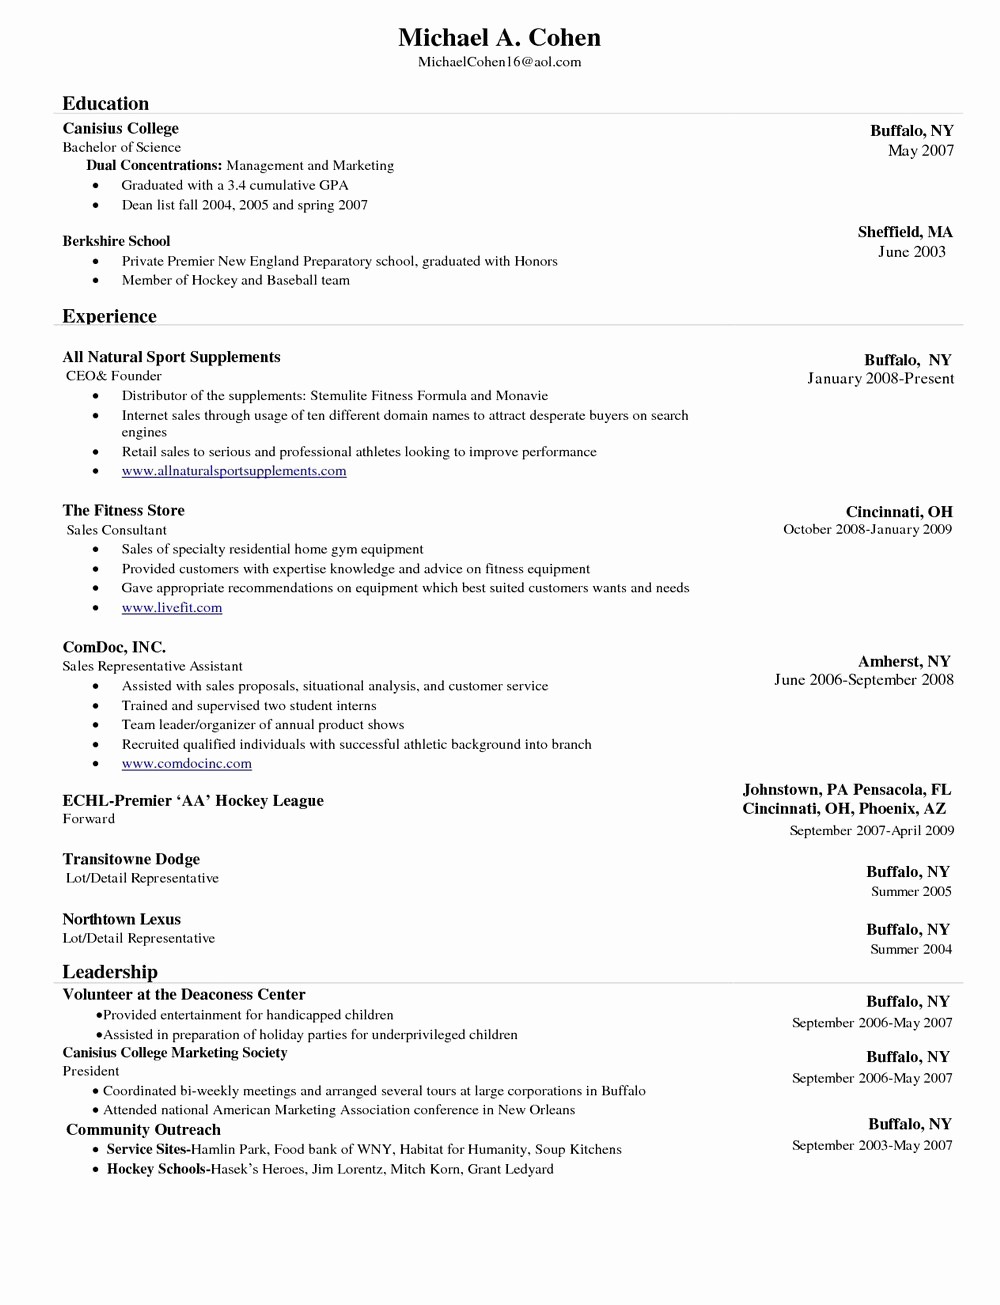 Functional Resume Templates Free Download Elegant Functional Resume Template Free Download Resumes 297